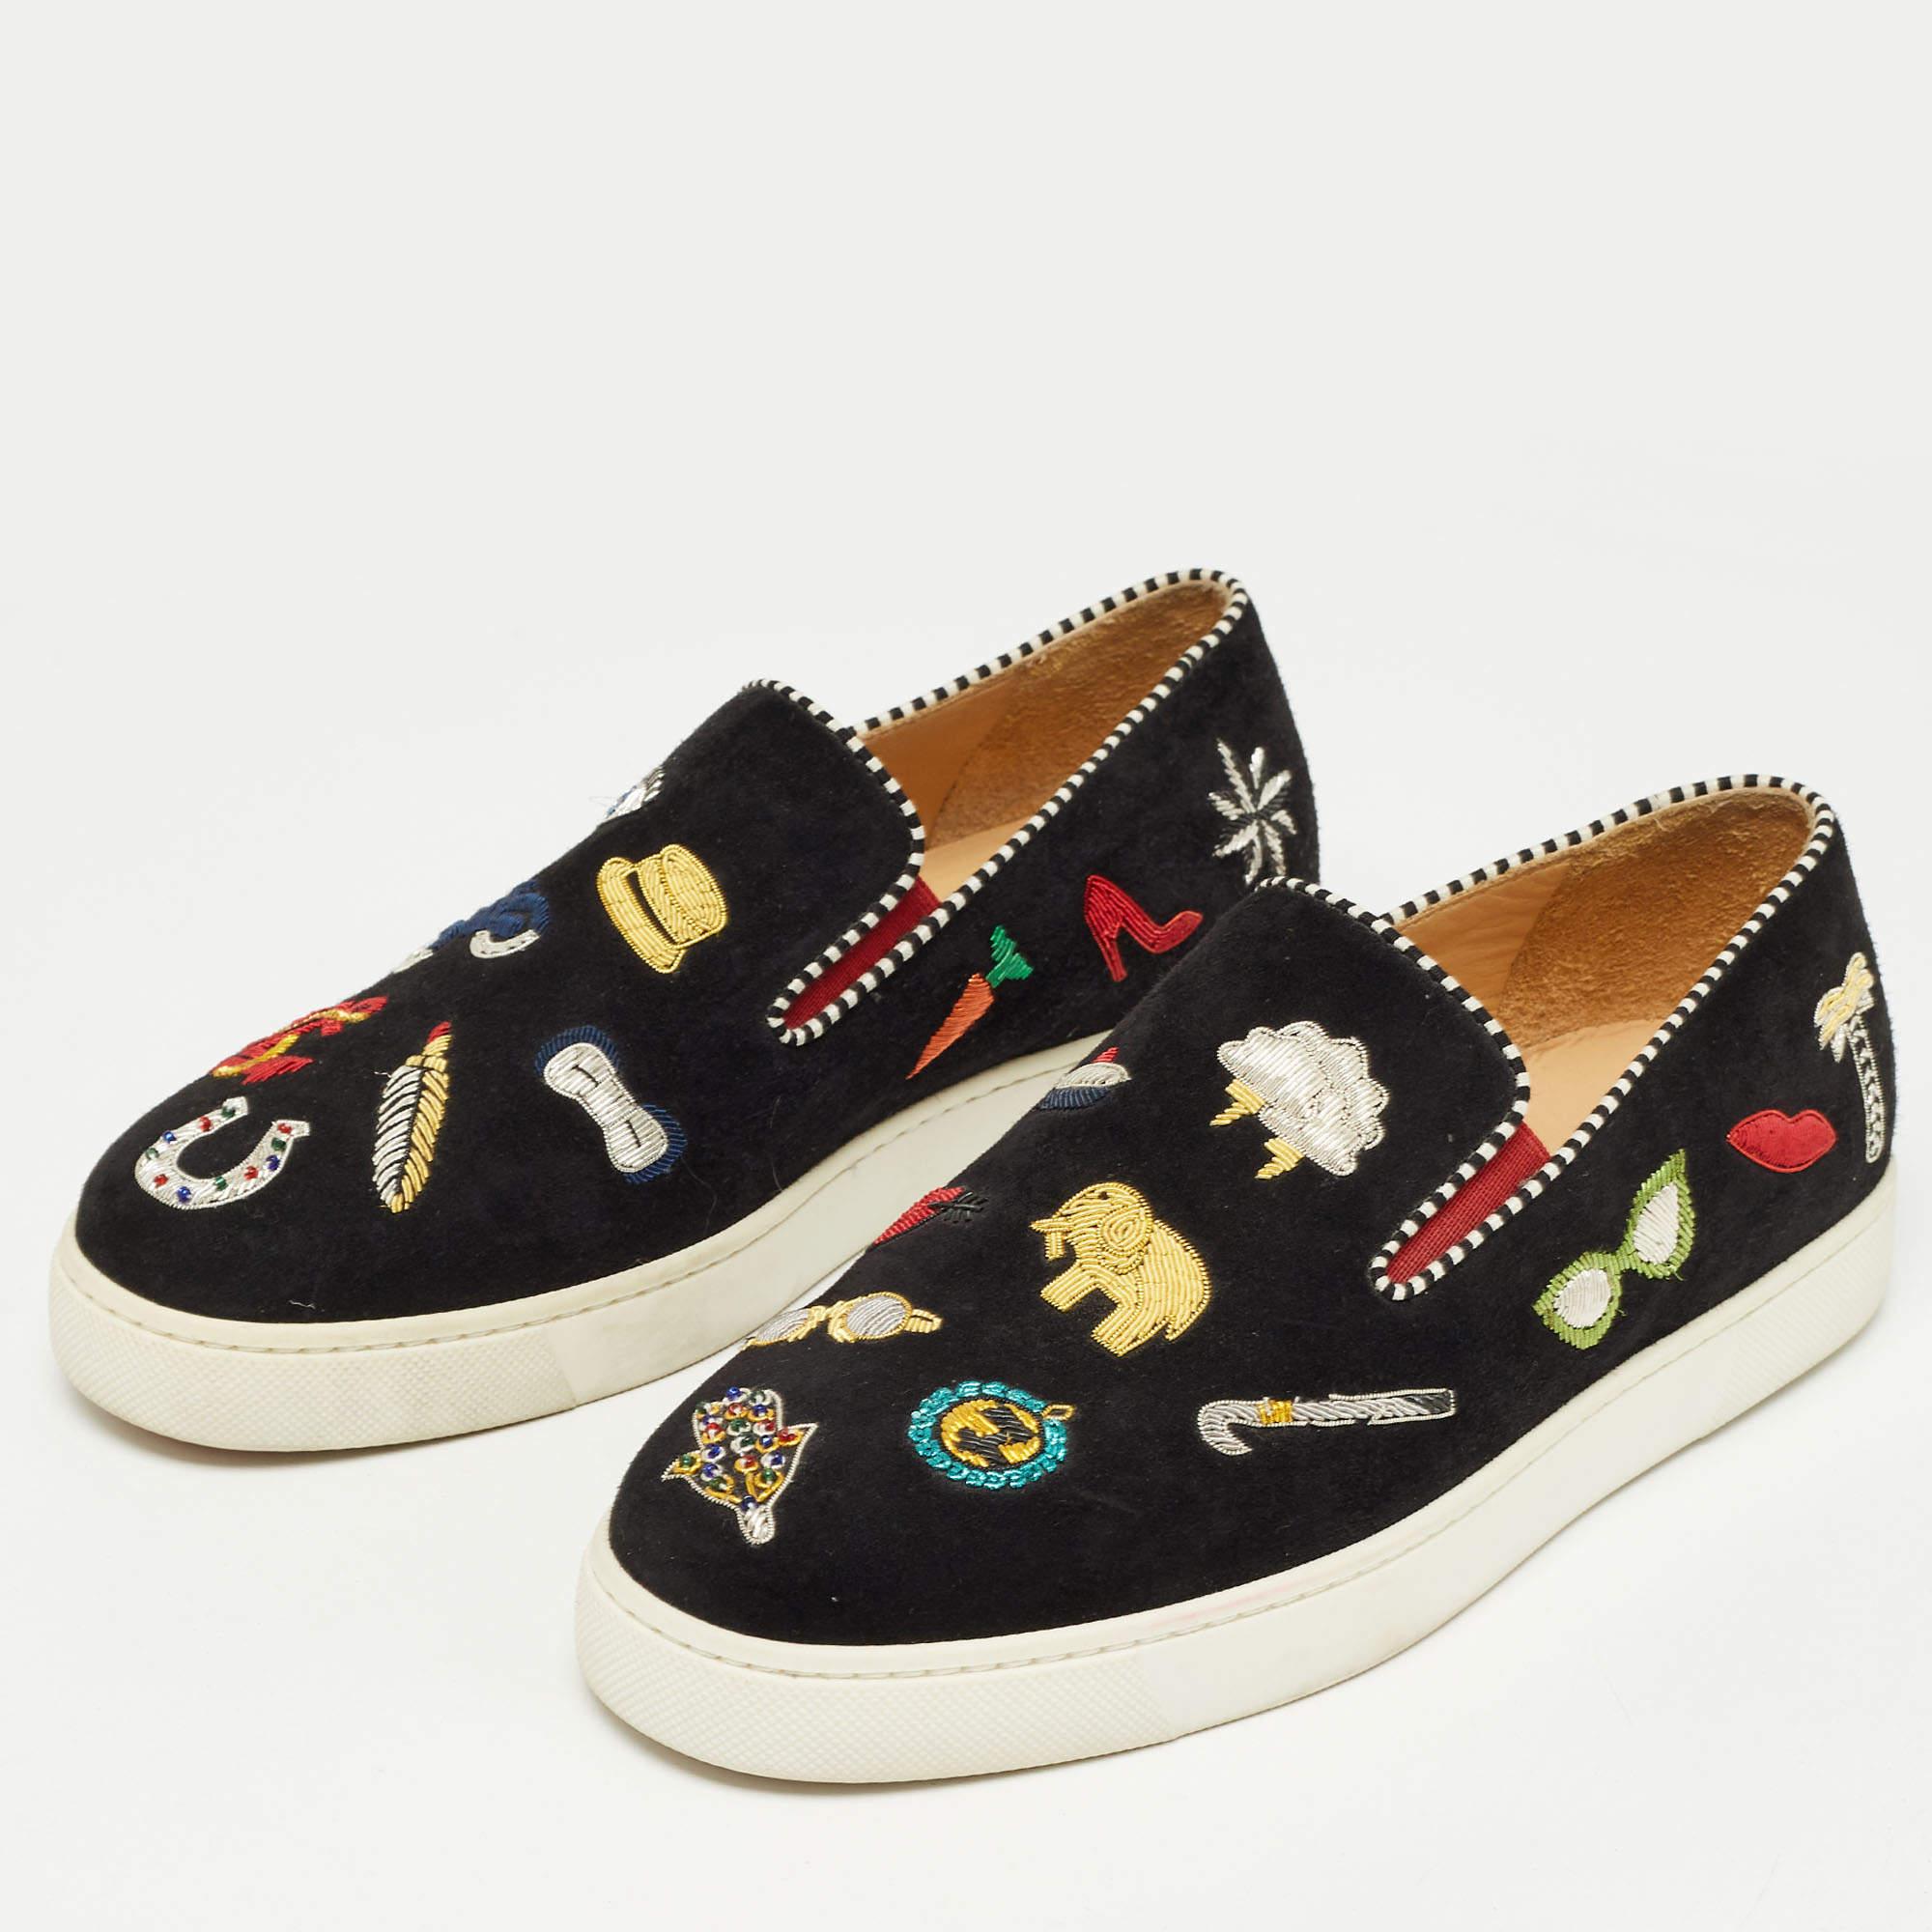 Christian Louboutin Black Suede Pik N Luck Sneakers Size 38 For Sale 2